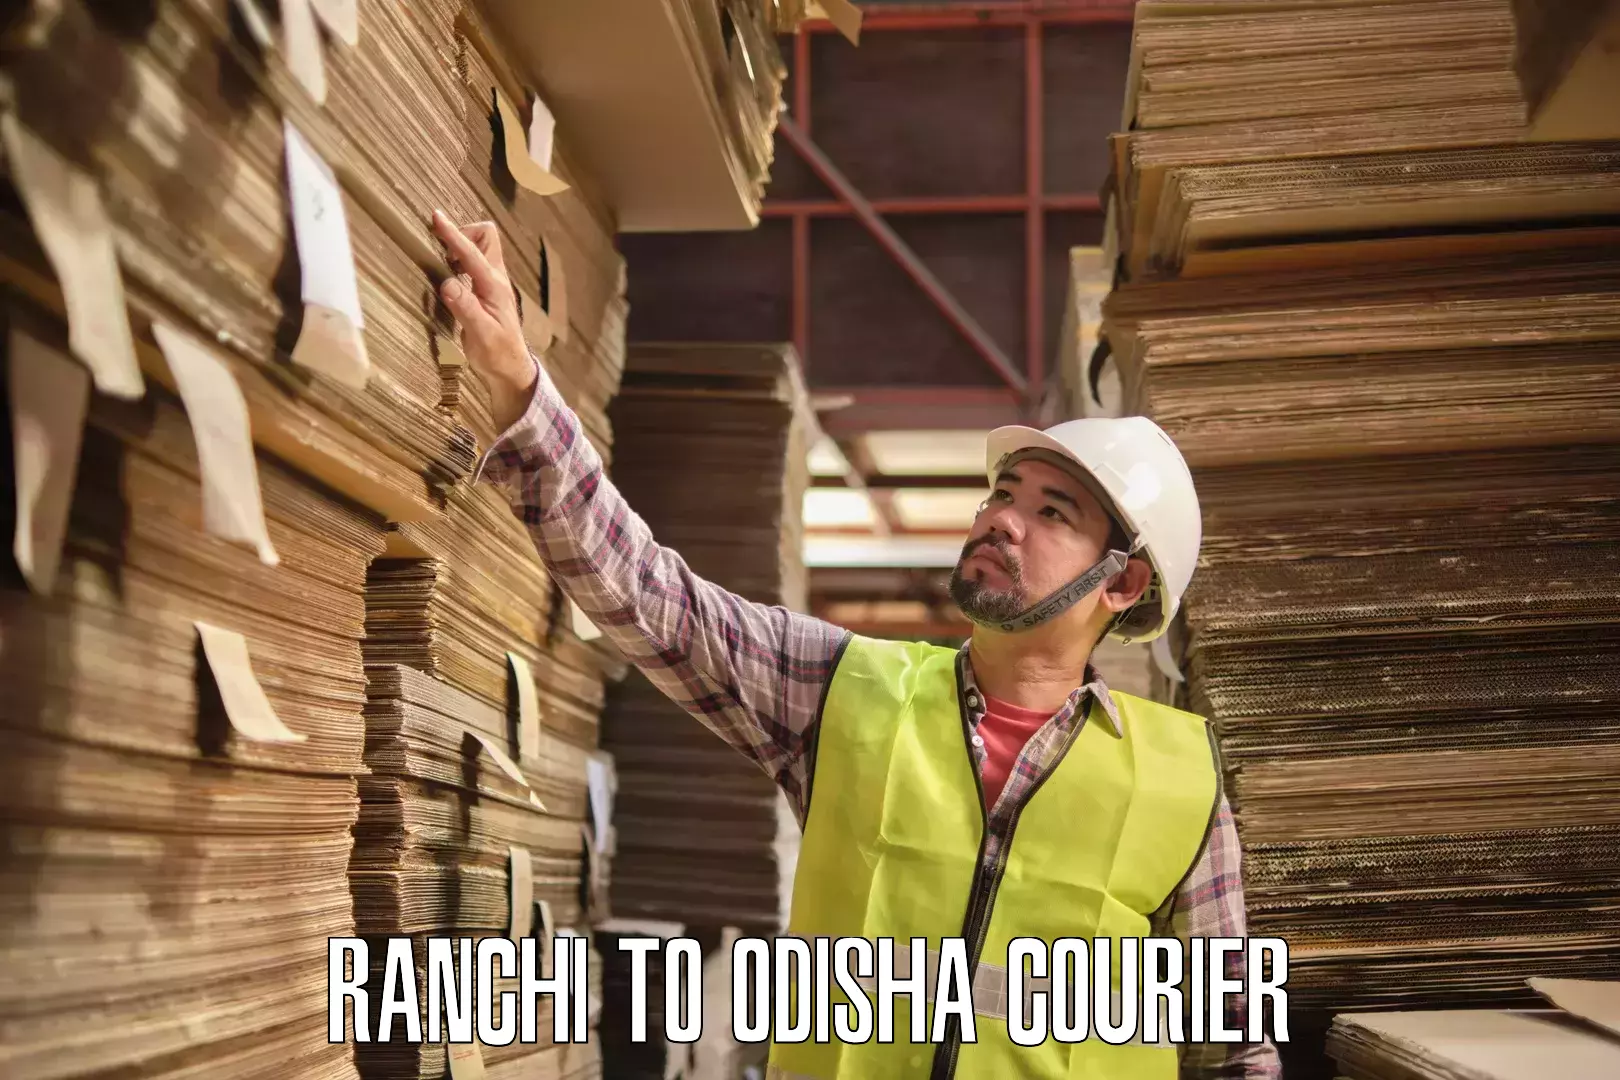 Sustainable courier practices Ranchi to Dandisahi